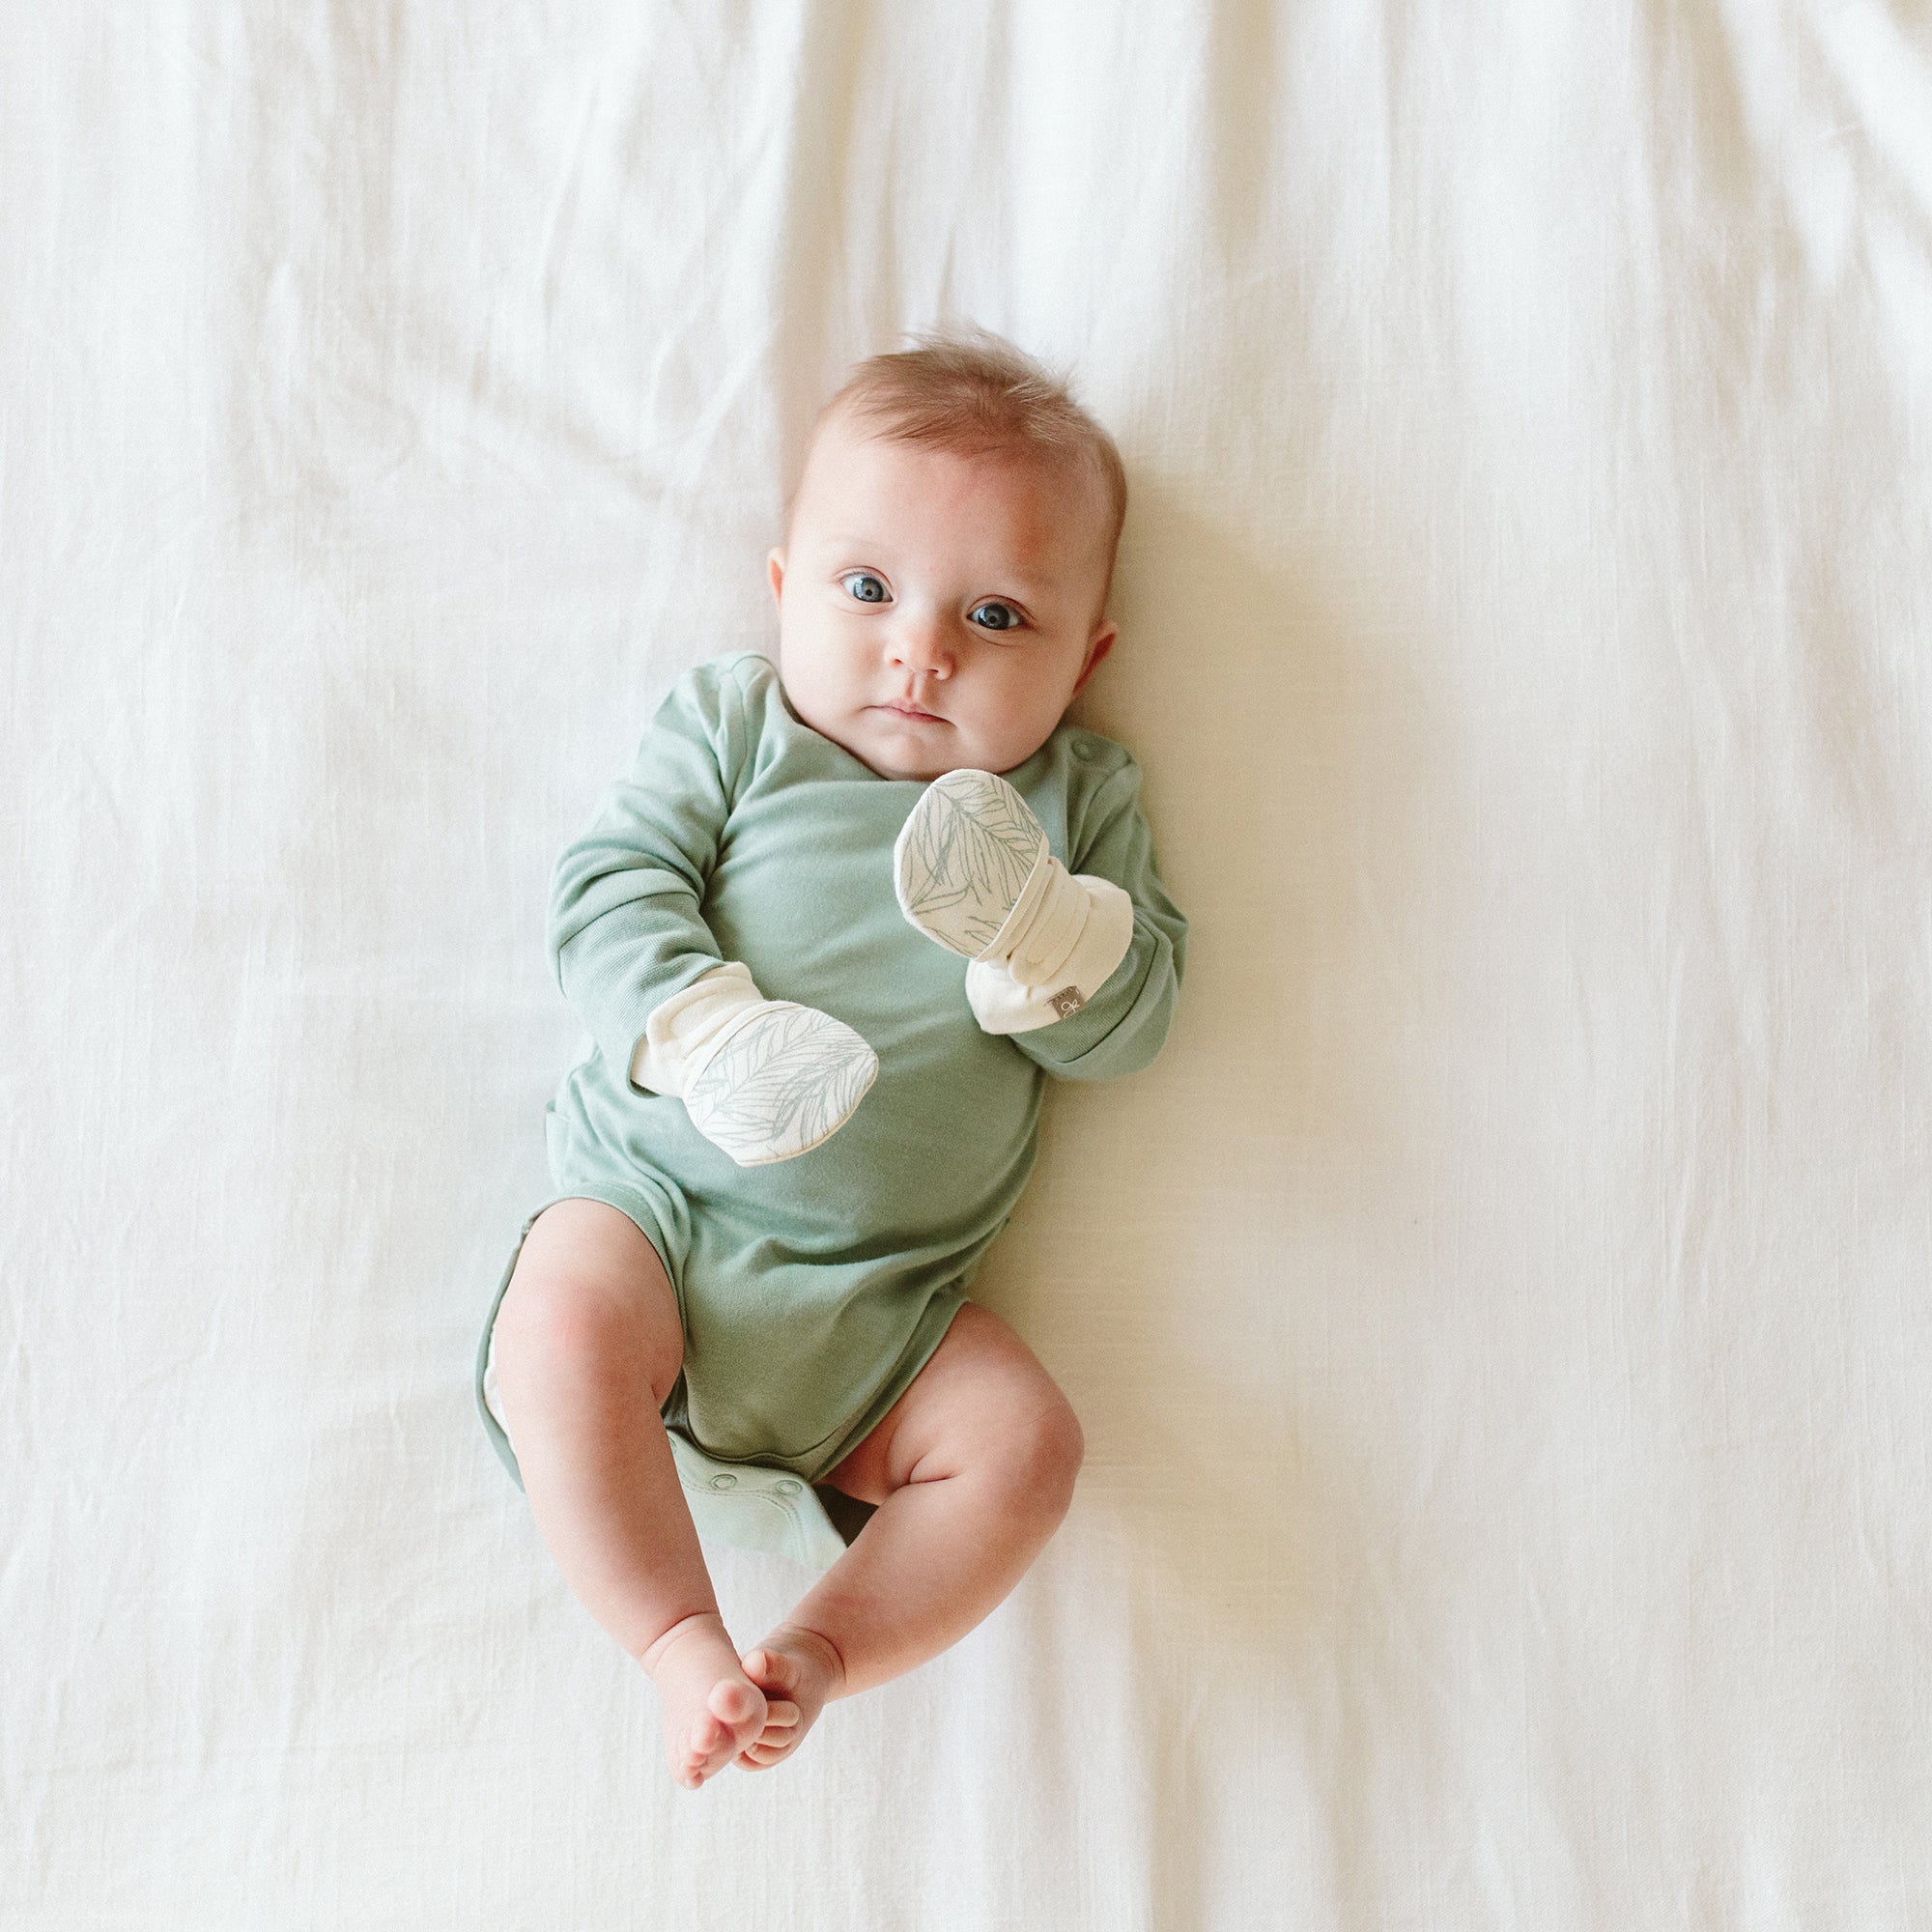 LONG-SLEEVE BODYSUIT | SEA GLASS | FITS SMALL SIZE UP